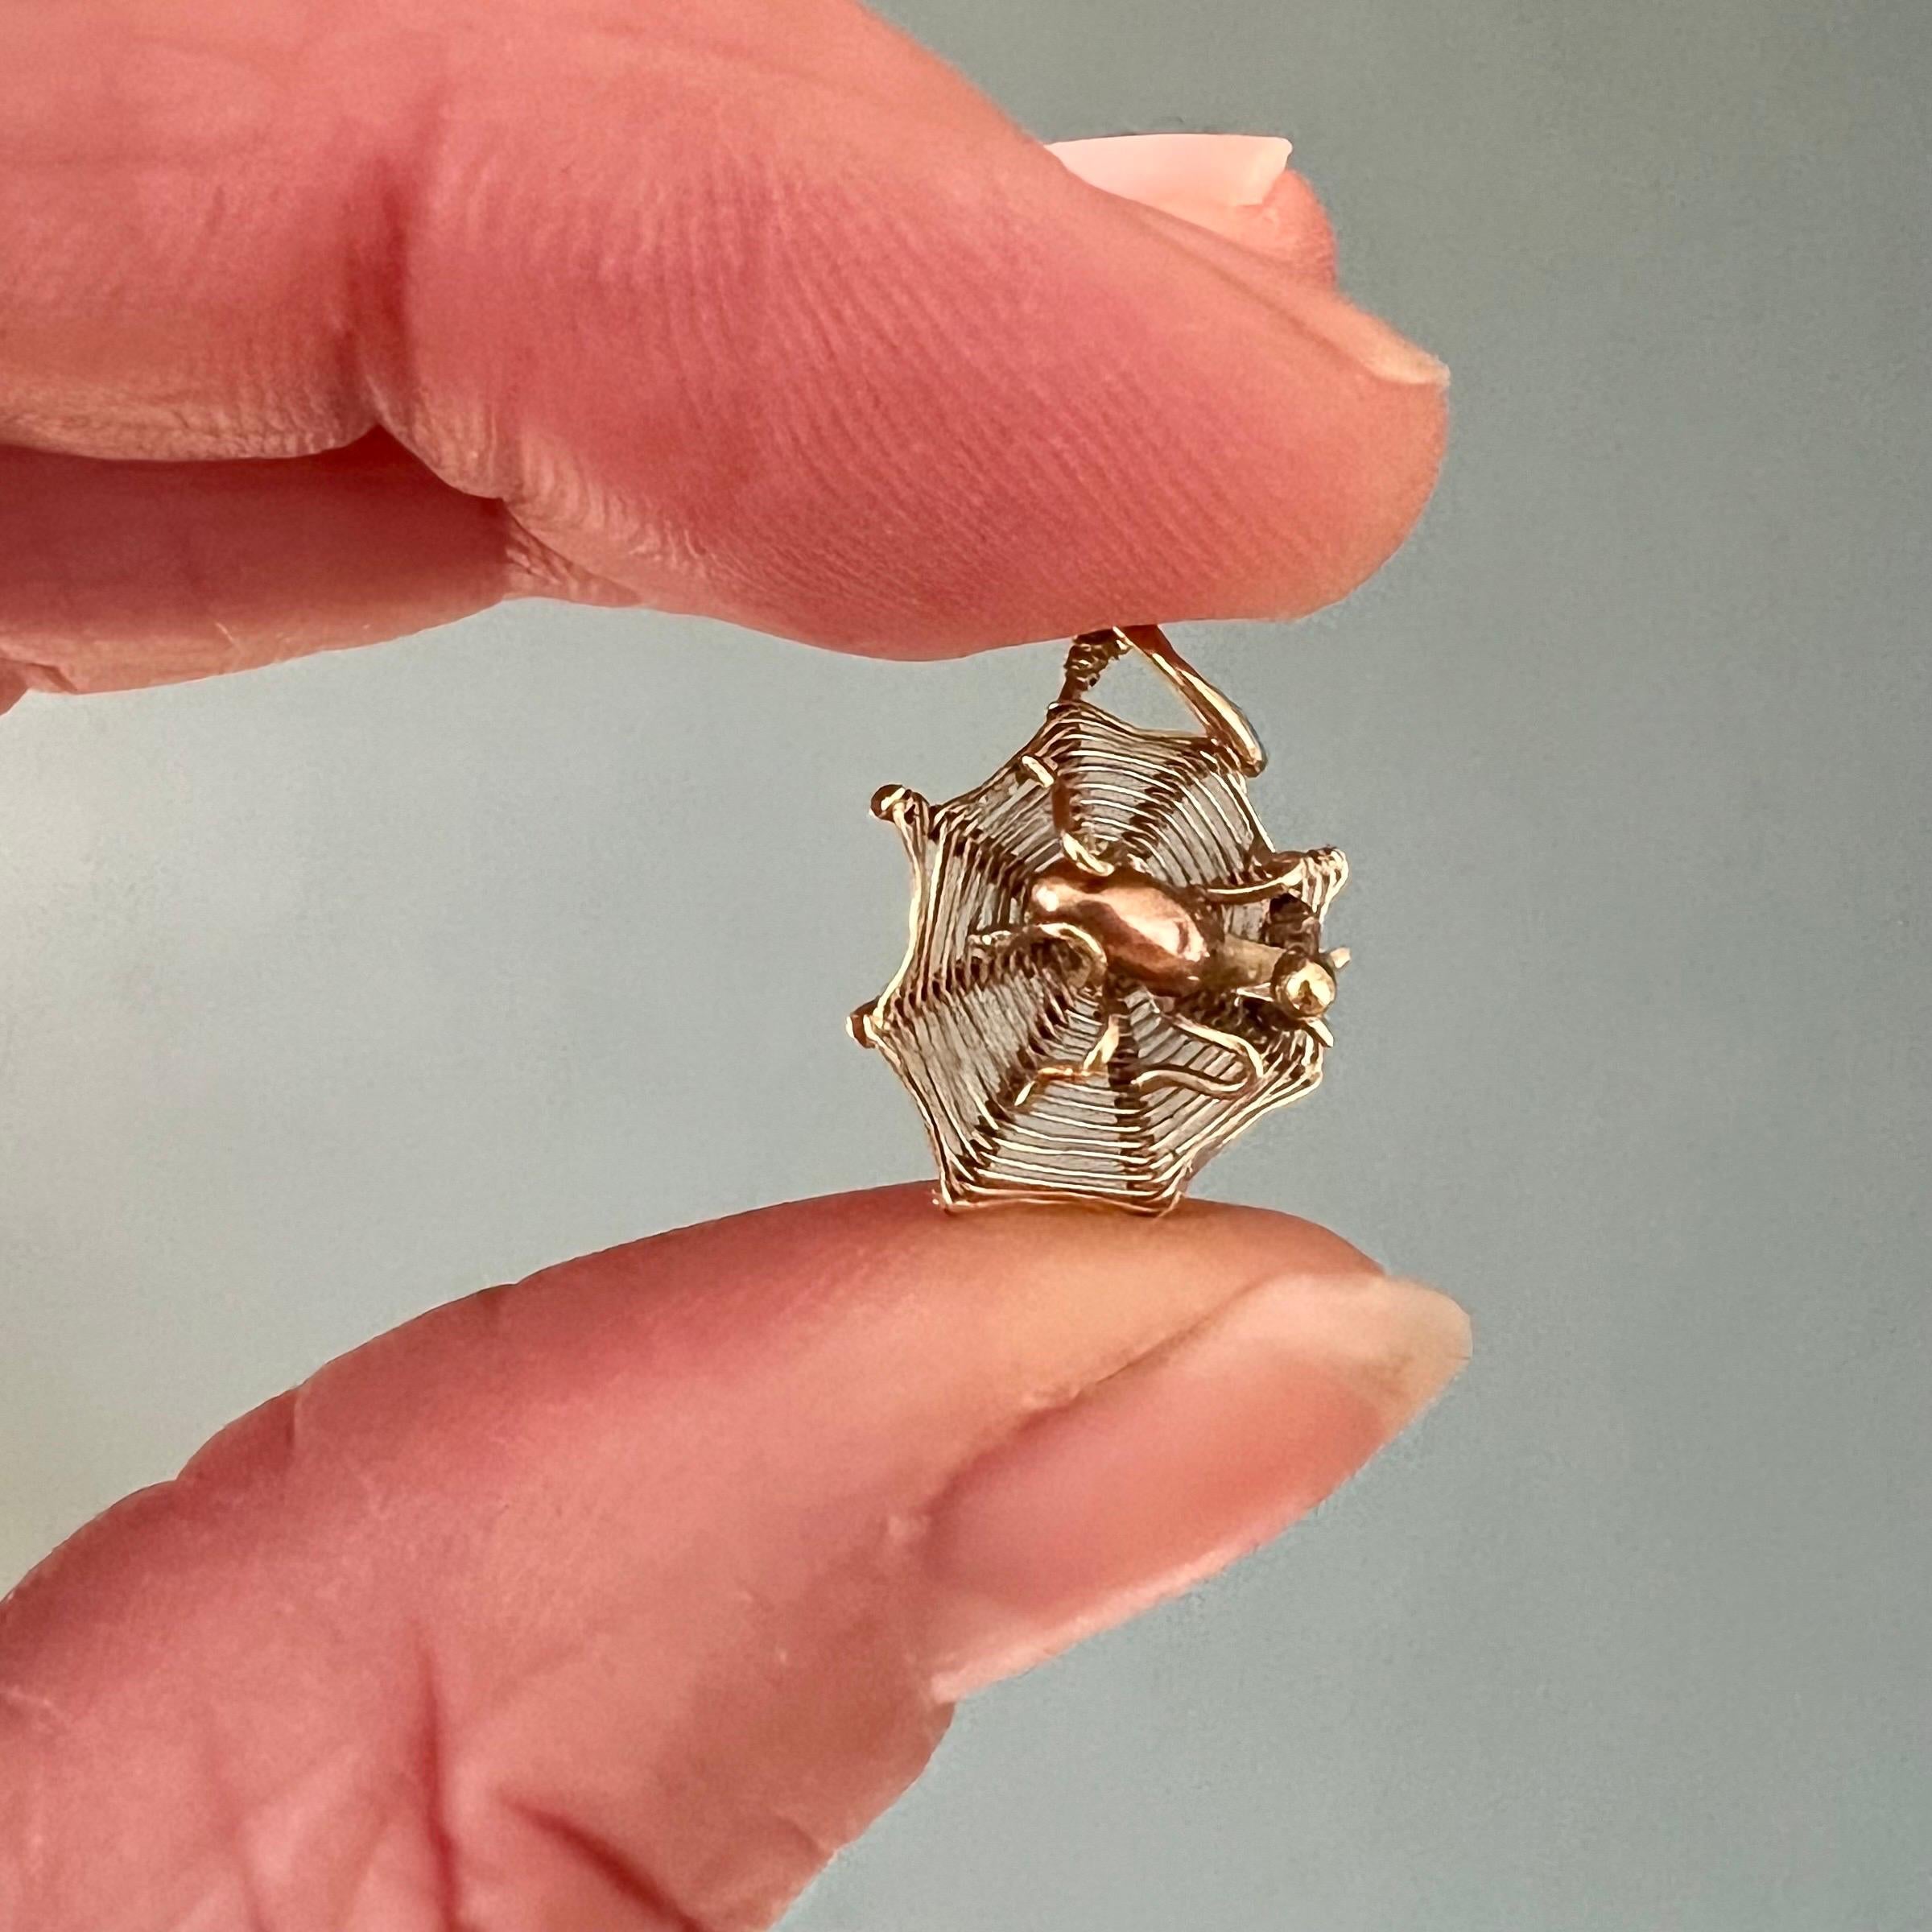 This is a 14 karat gold vintage spider web charm. This adorable spider web charm is beautifully made with a rose gold spider in the center spinning its web to catch delicious insect meals.

Charms are great to collect as wearable memories, it has a